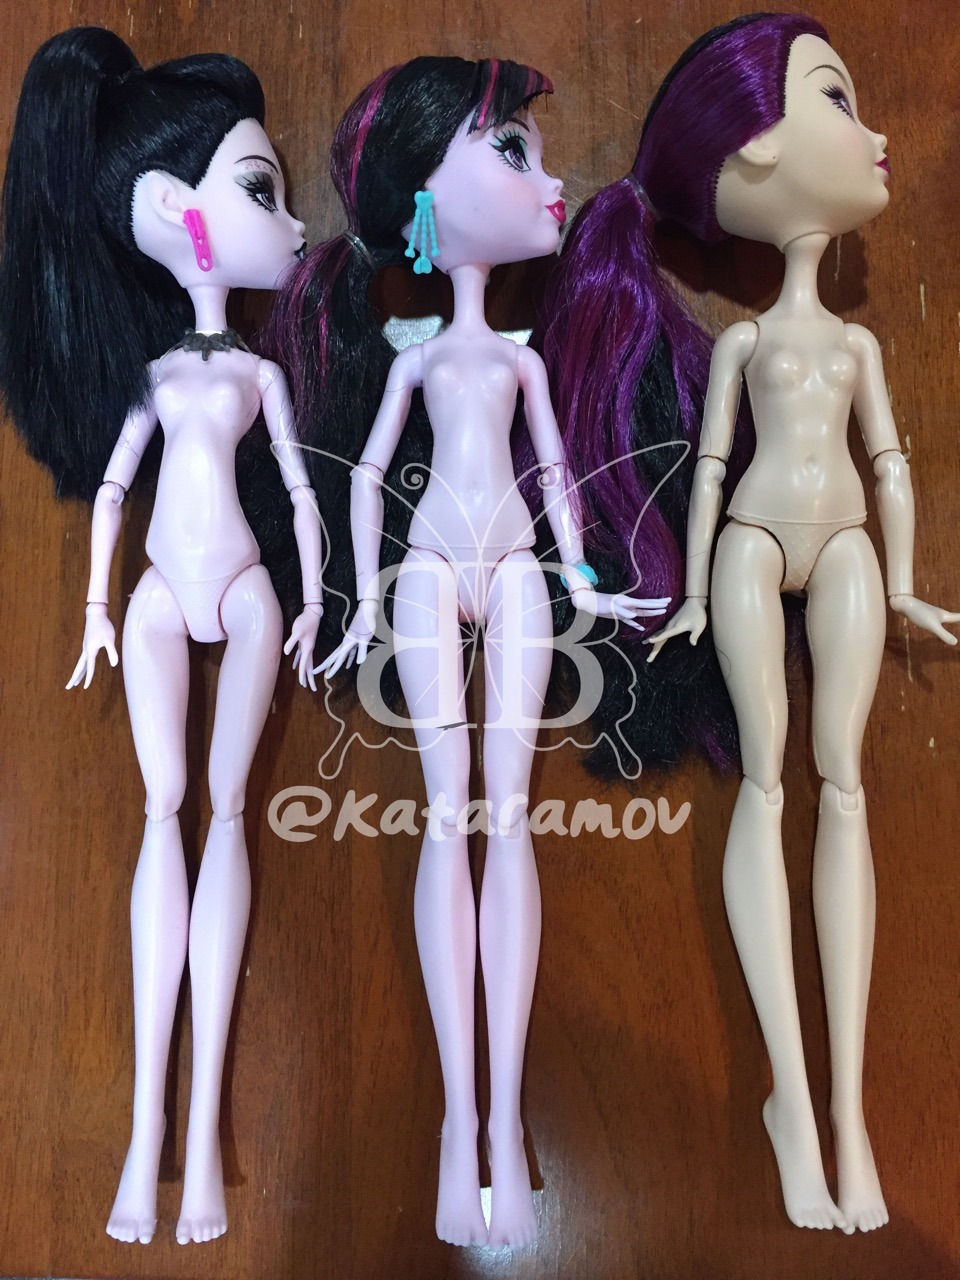 kataramov:
“koolelkat34:
“curiobjd:
“ kataramov:
“ okay! this has definitely been done before, but I know there’s still some confusion, so I wanted to post my own comparison showcasing the new Monster High body sculpt. :3
it takes a lot of cues from...